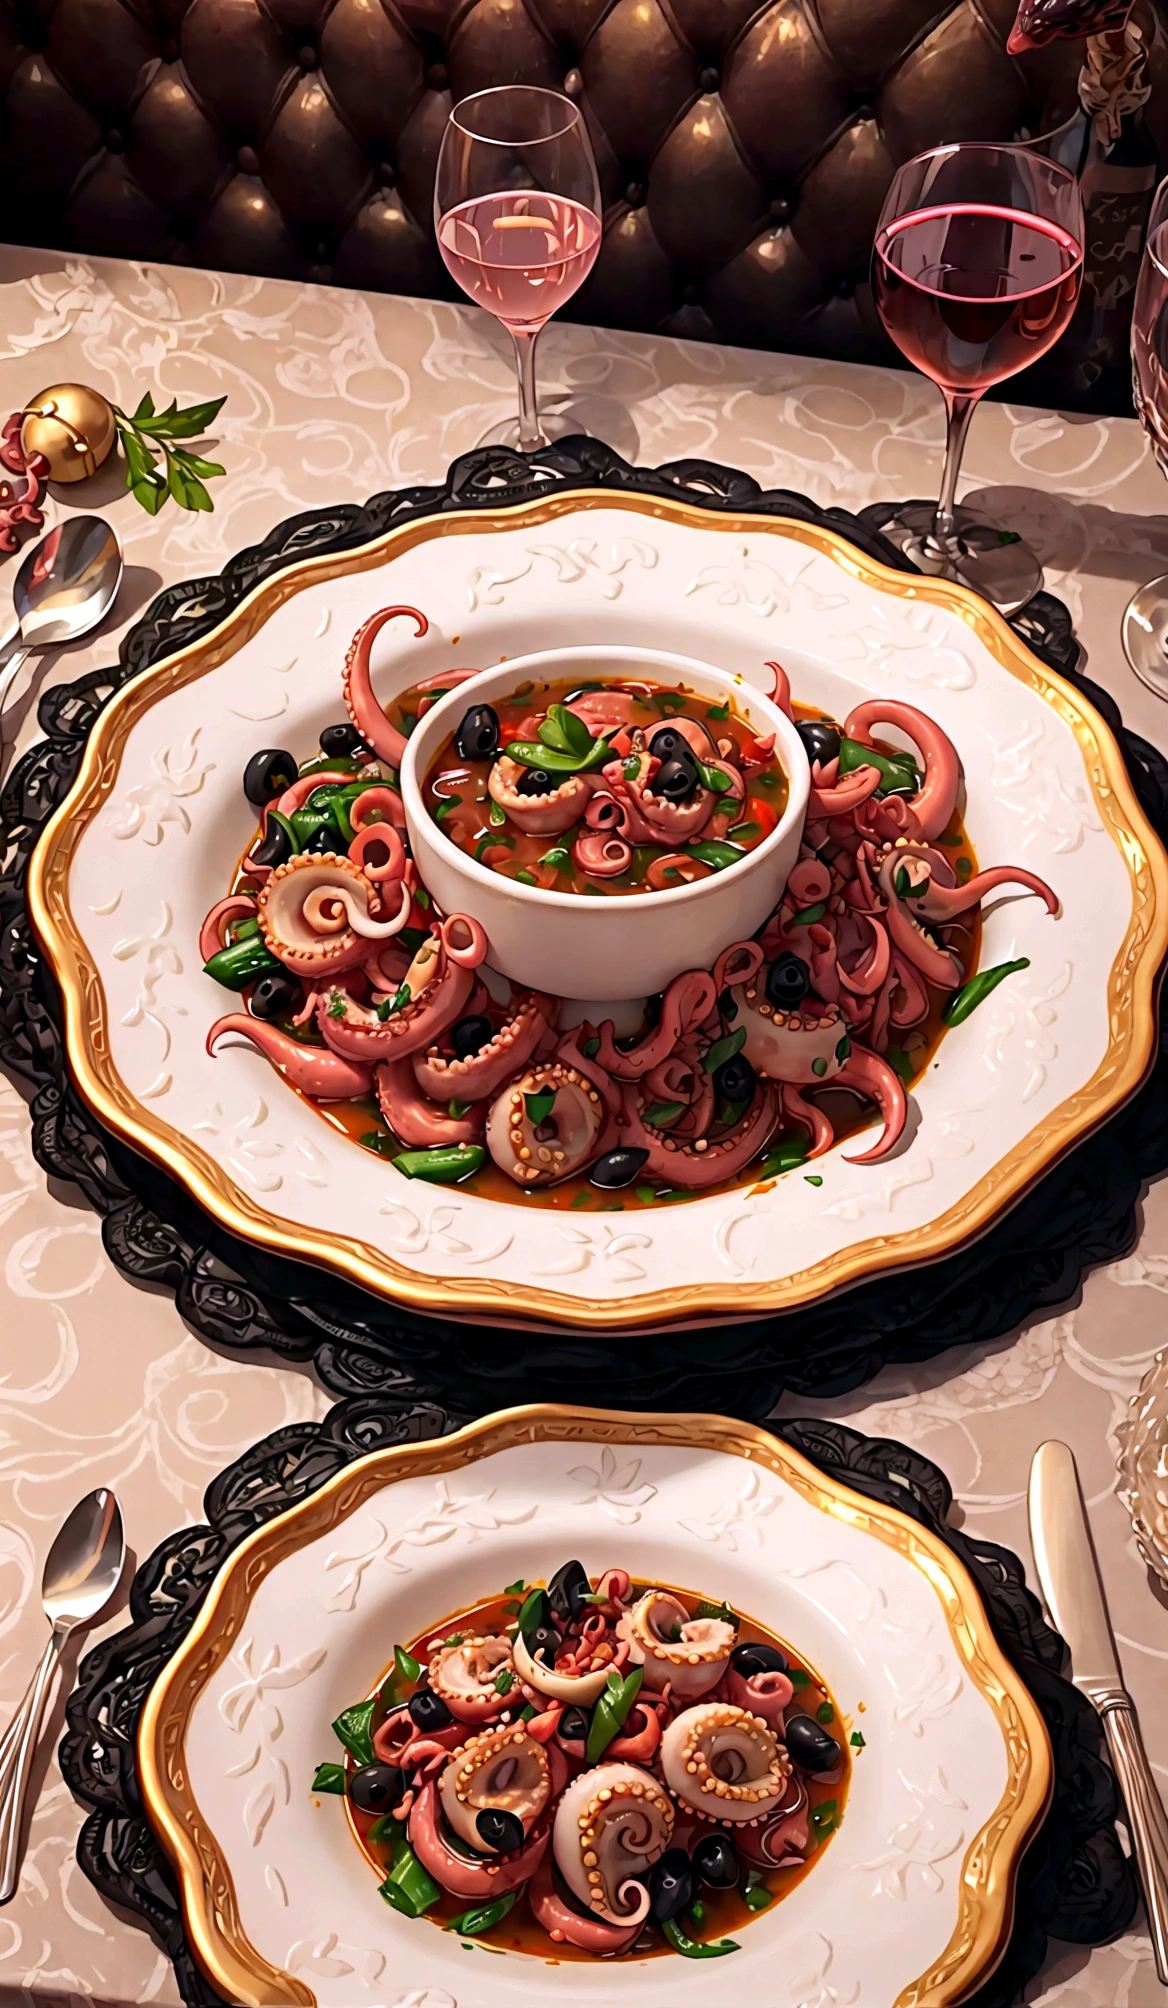 a plate of very tasty-looking soup with large tentacles of octopus seasoned with stewed tomatoes, chunks of cheese and lemon. a table set for dinner, gold cutlery, a glass of champagne. A vase with ice and a bottle of wine.
